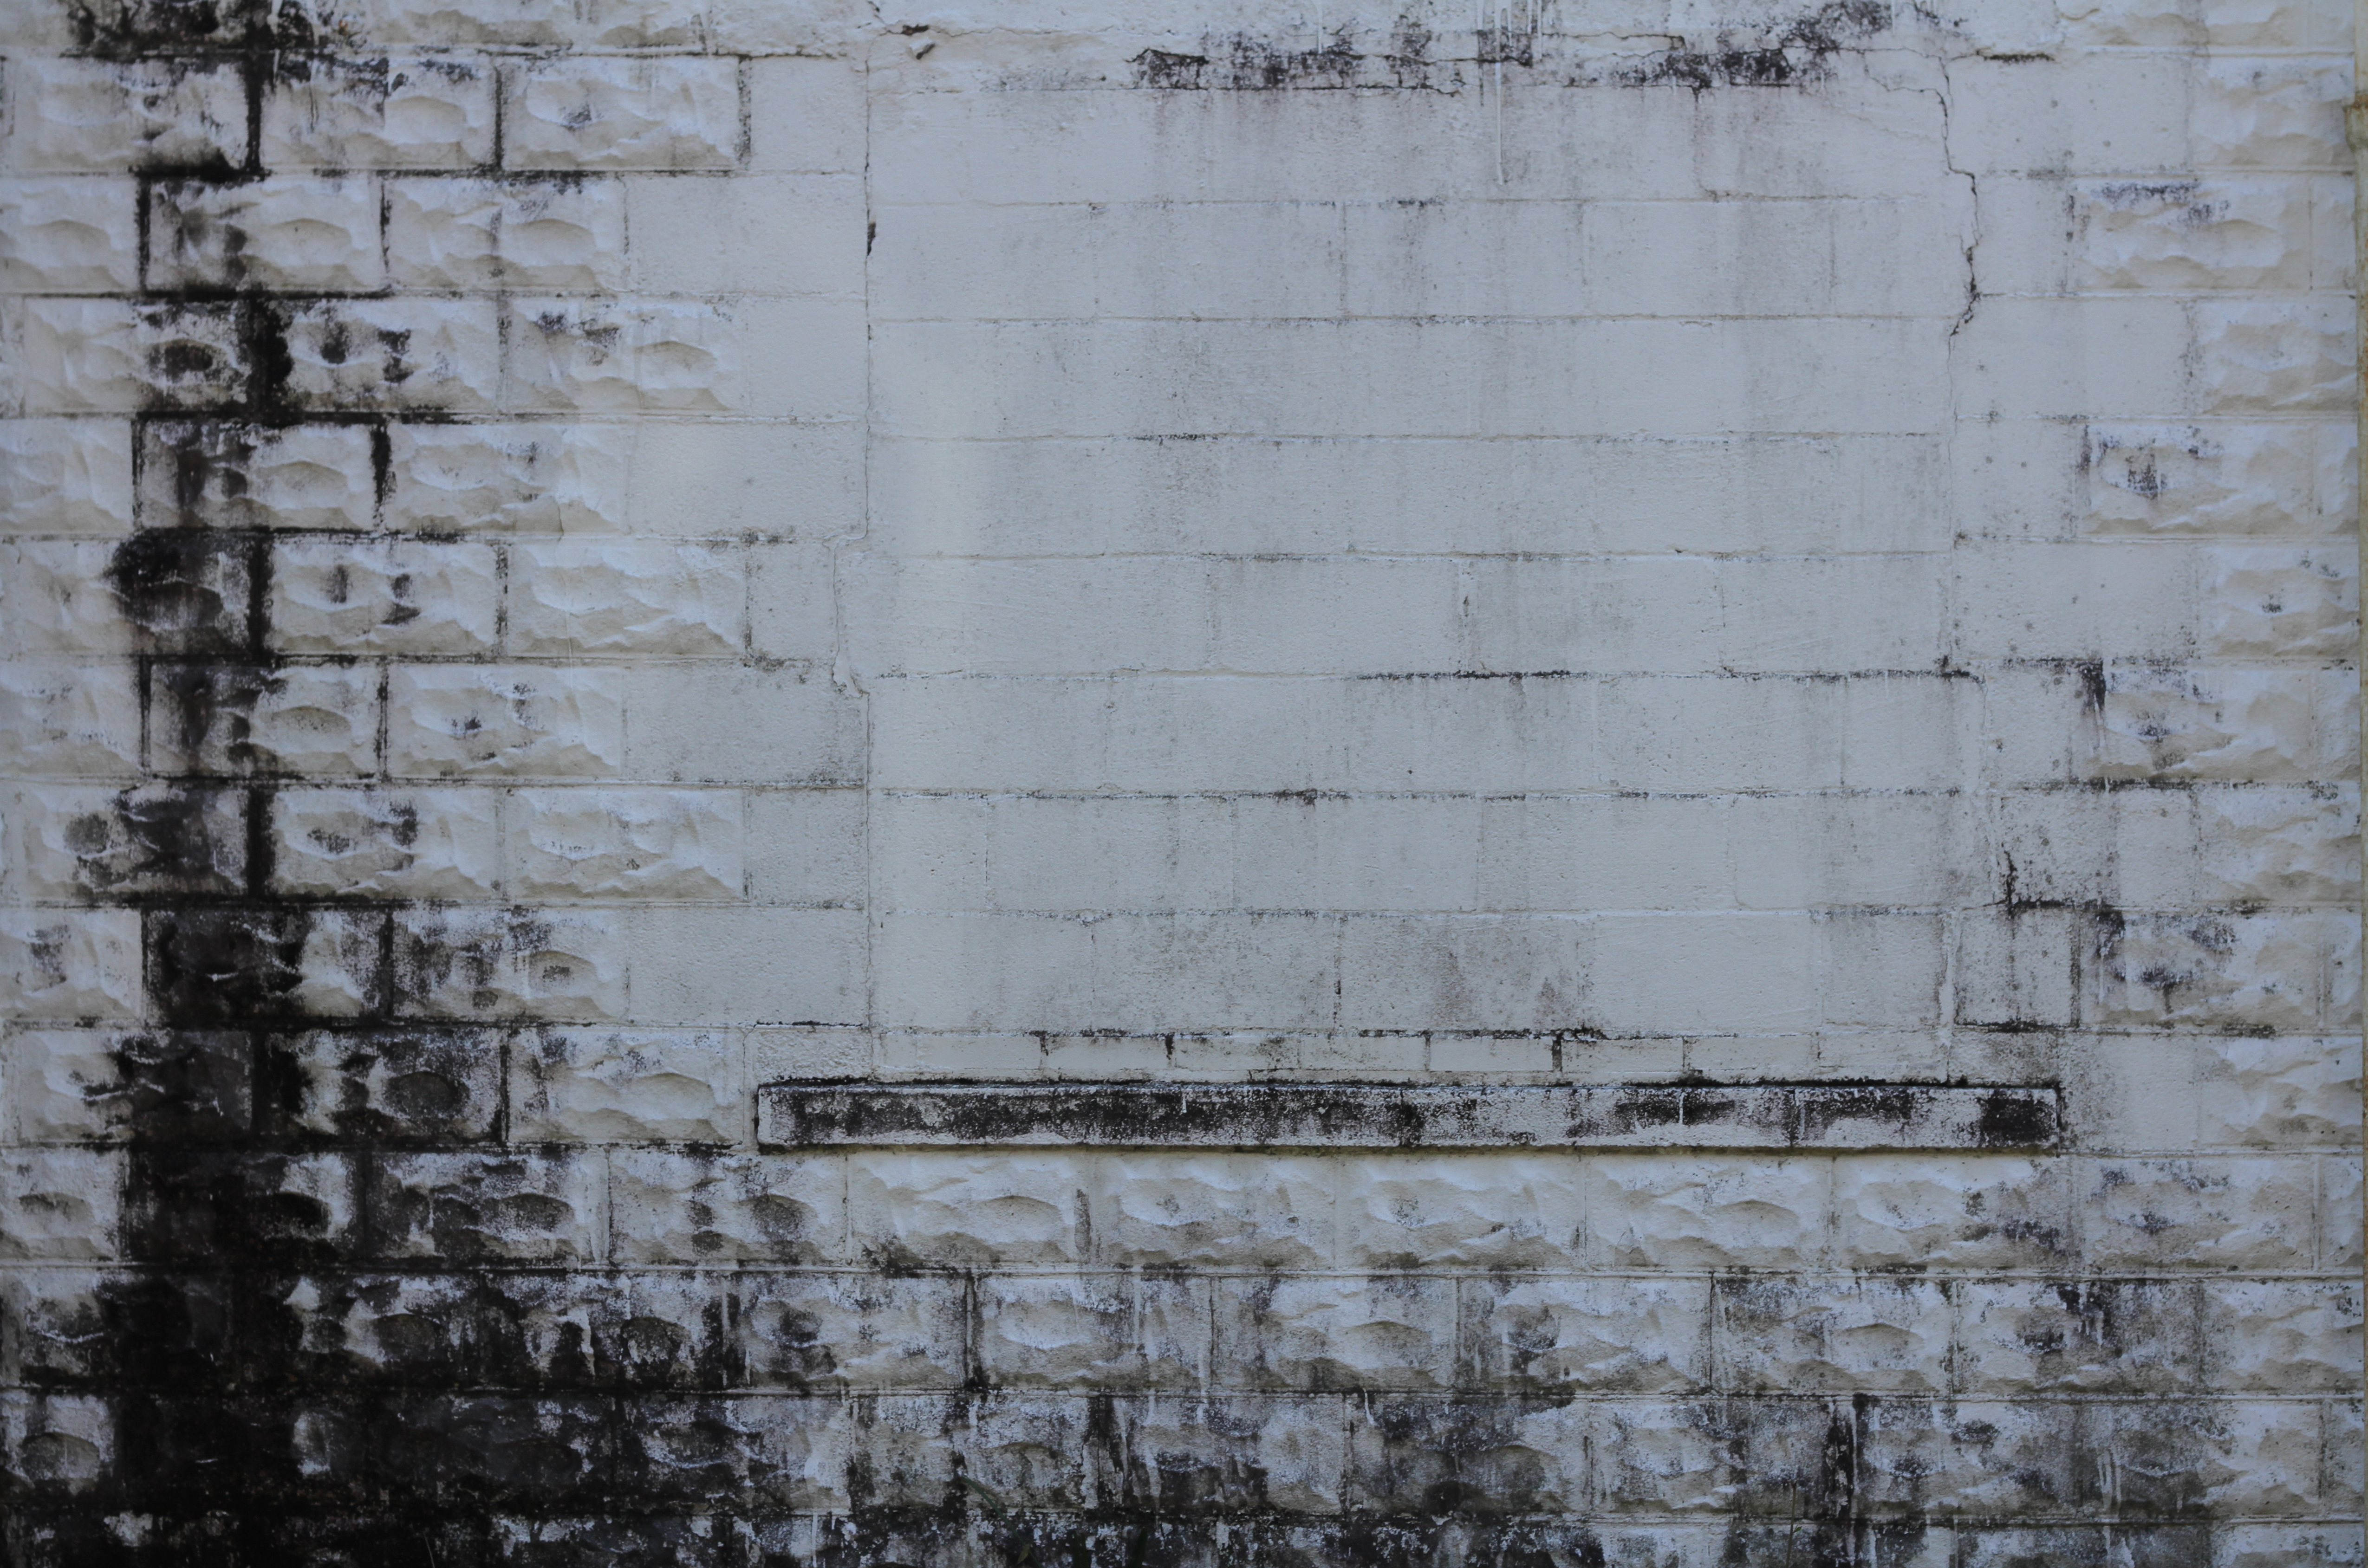 Dirty White Block Wall Texture - 14Textures